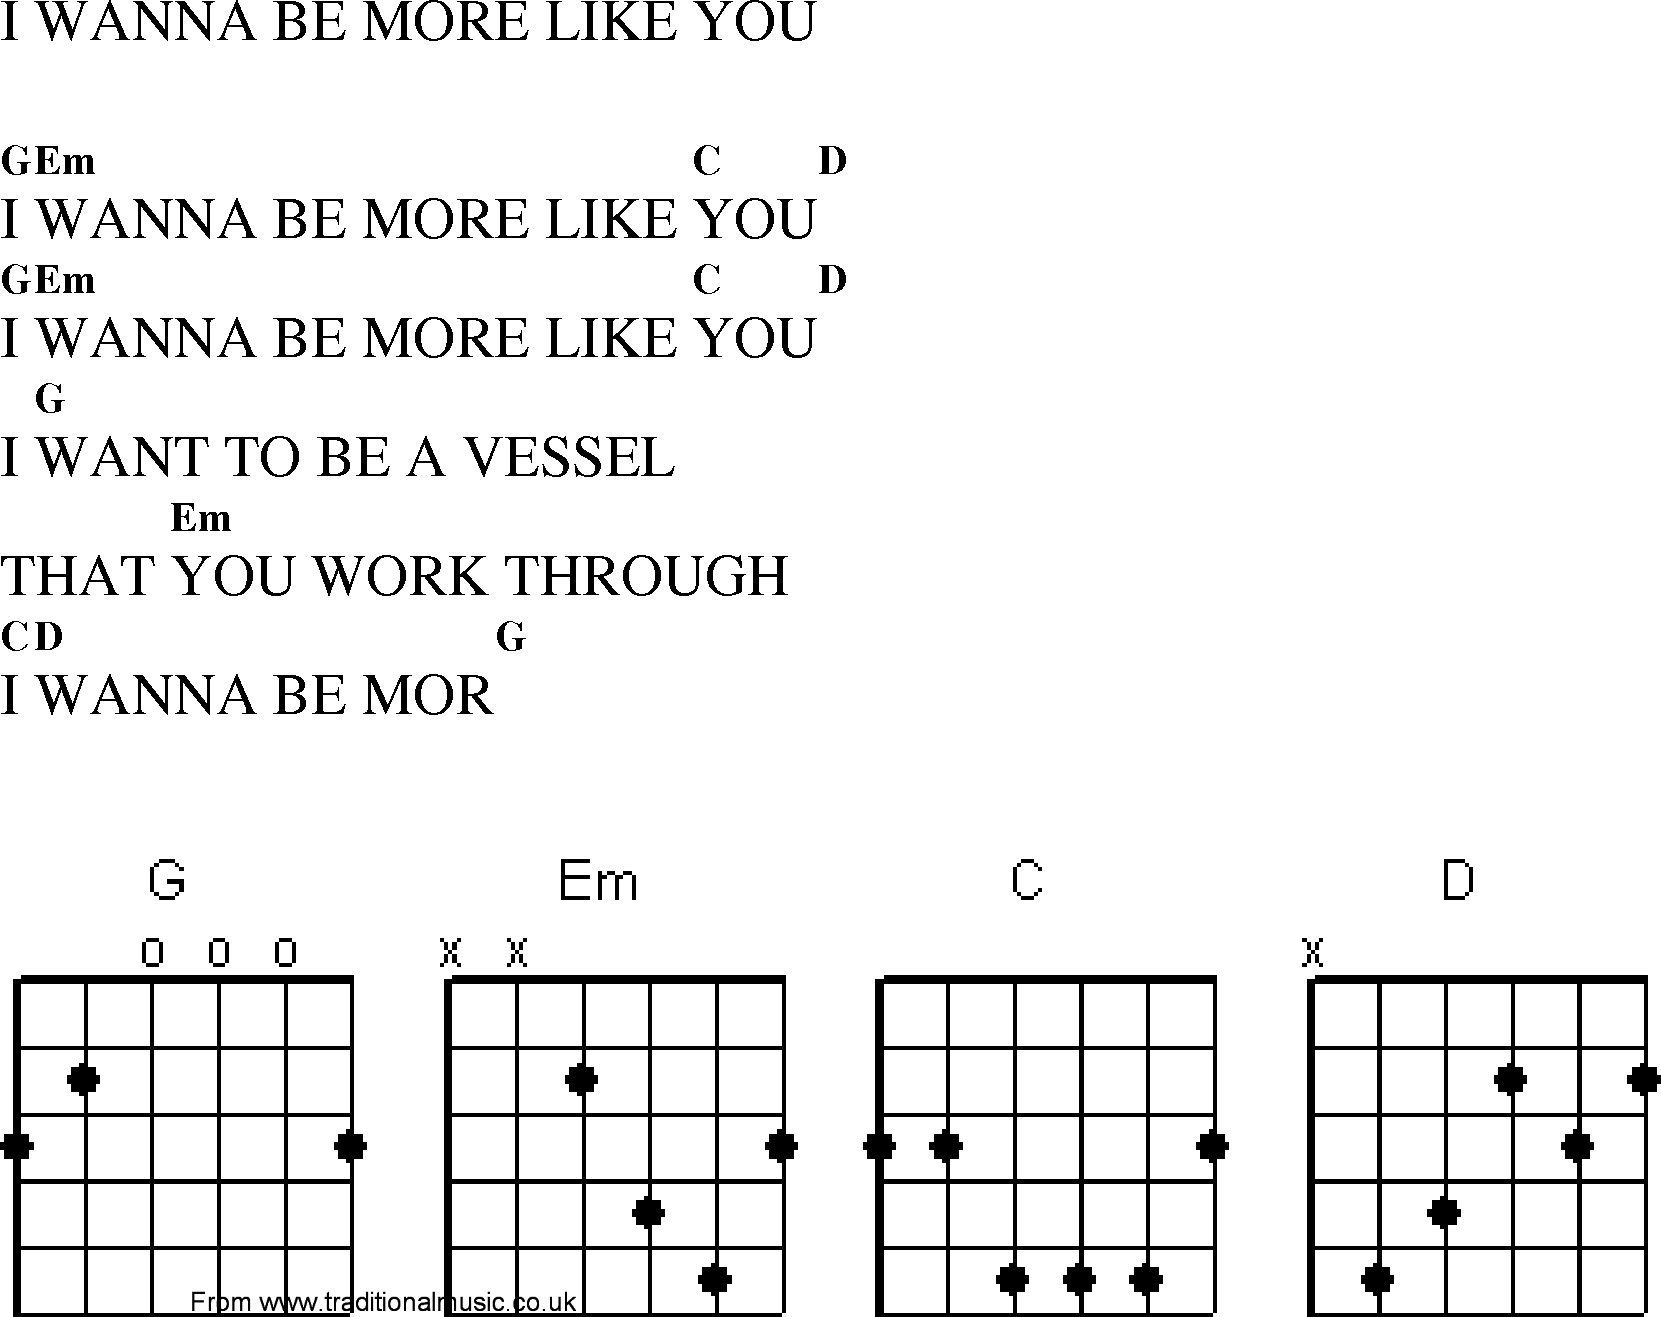 Gospel Song: i_wanna_be_more_like_you, lyrics and chords.